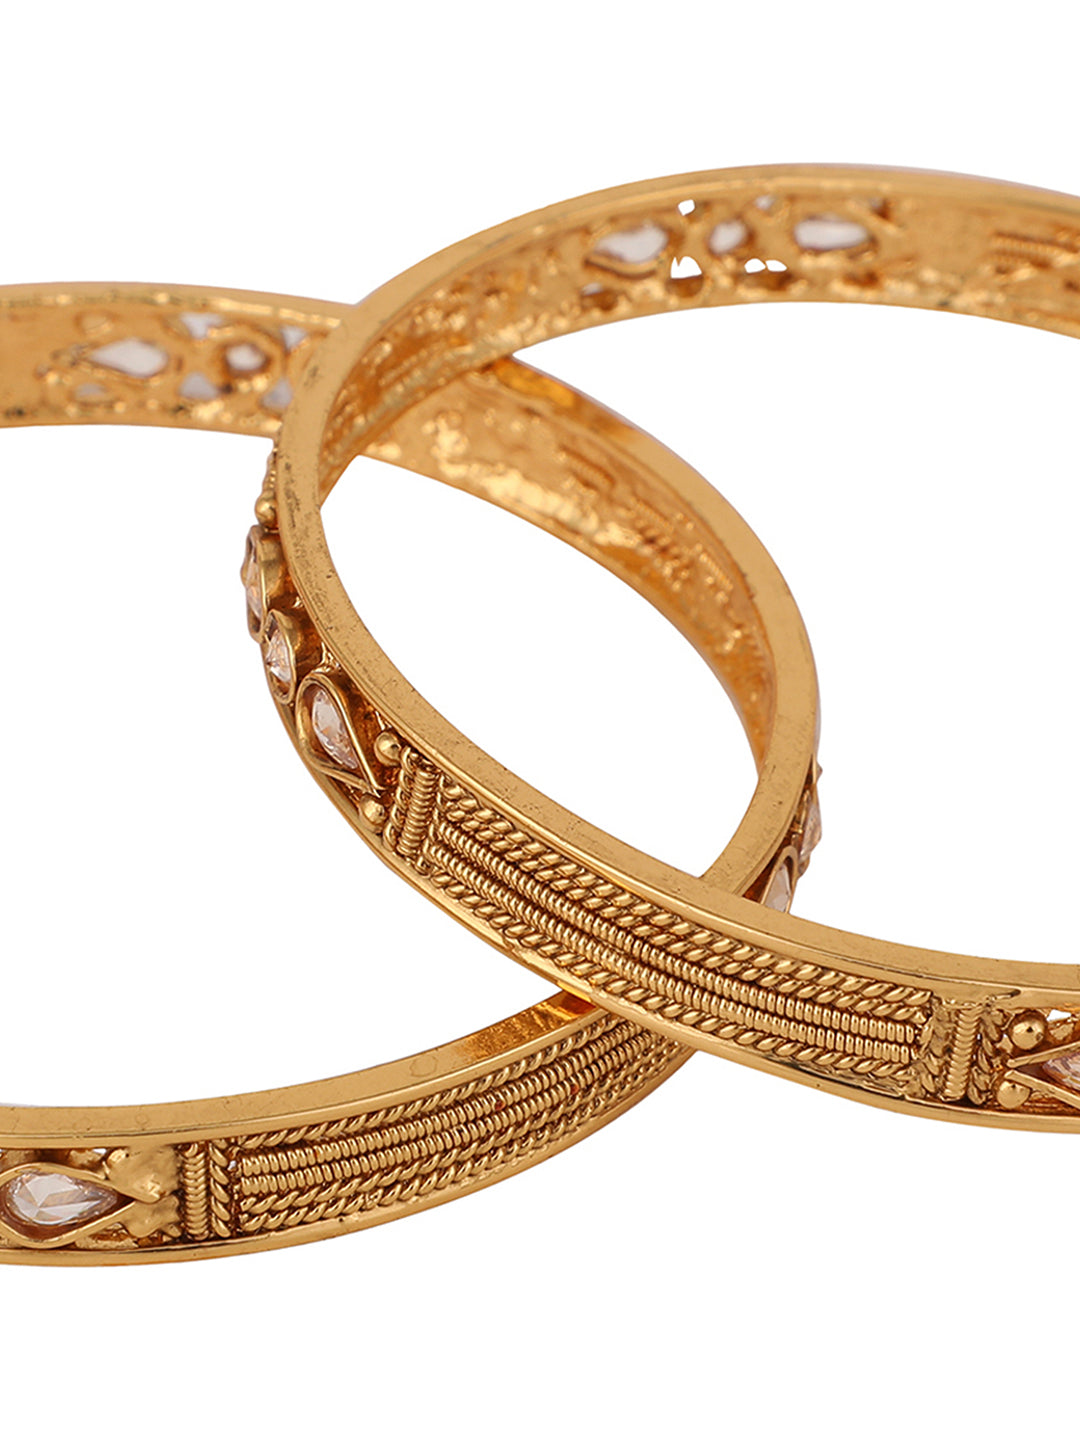 Women's Set Of 2 24K Gold-Plated Red & Green Stone-Studded Hand Crafted Bangles - Anikas Creation